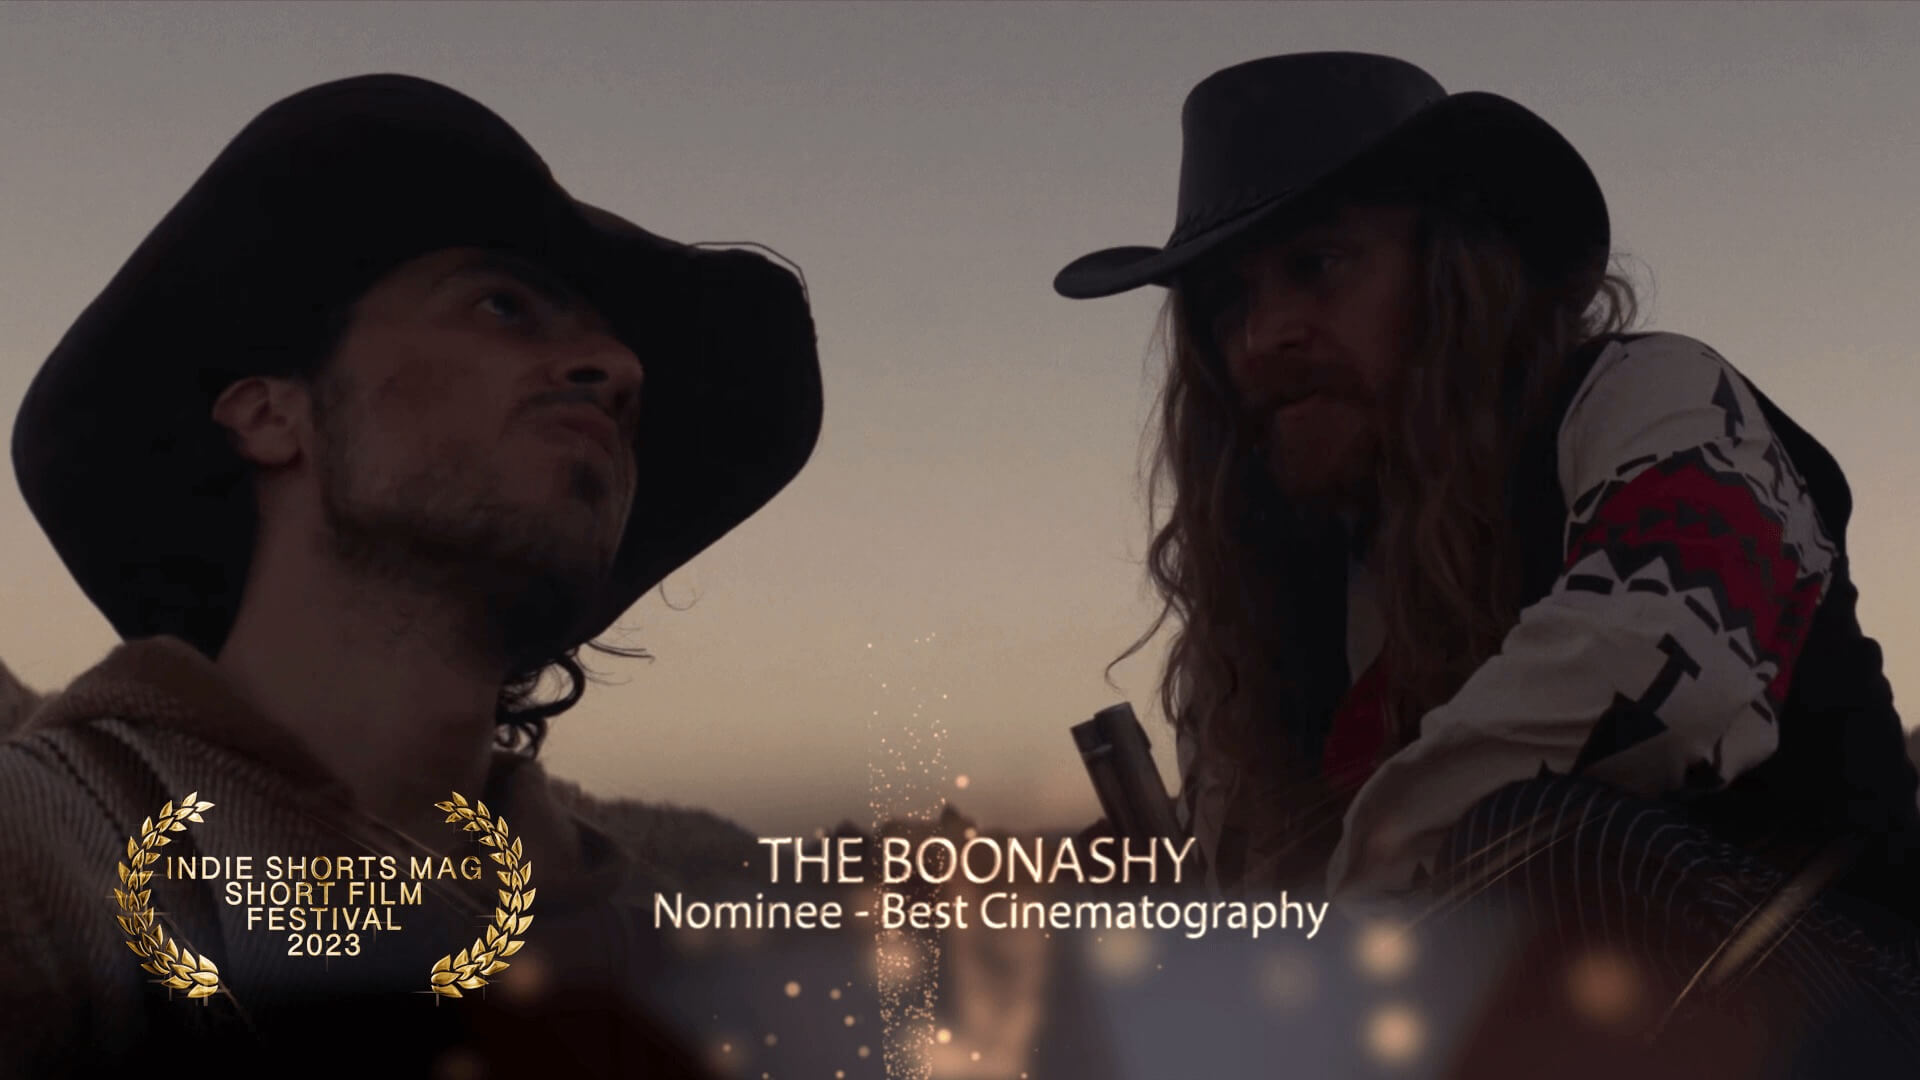 Indie Shorts Mag Short Film Festival - Best Cinematography - Nominee - The Boonashy